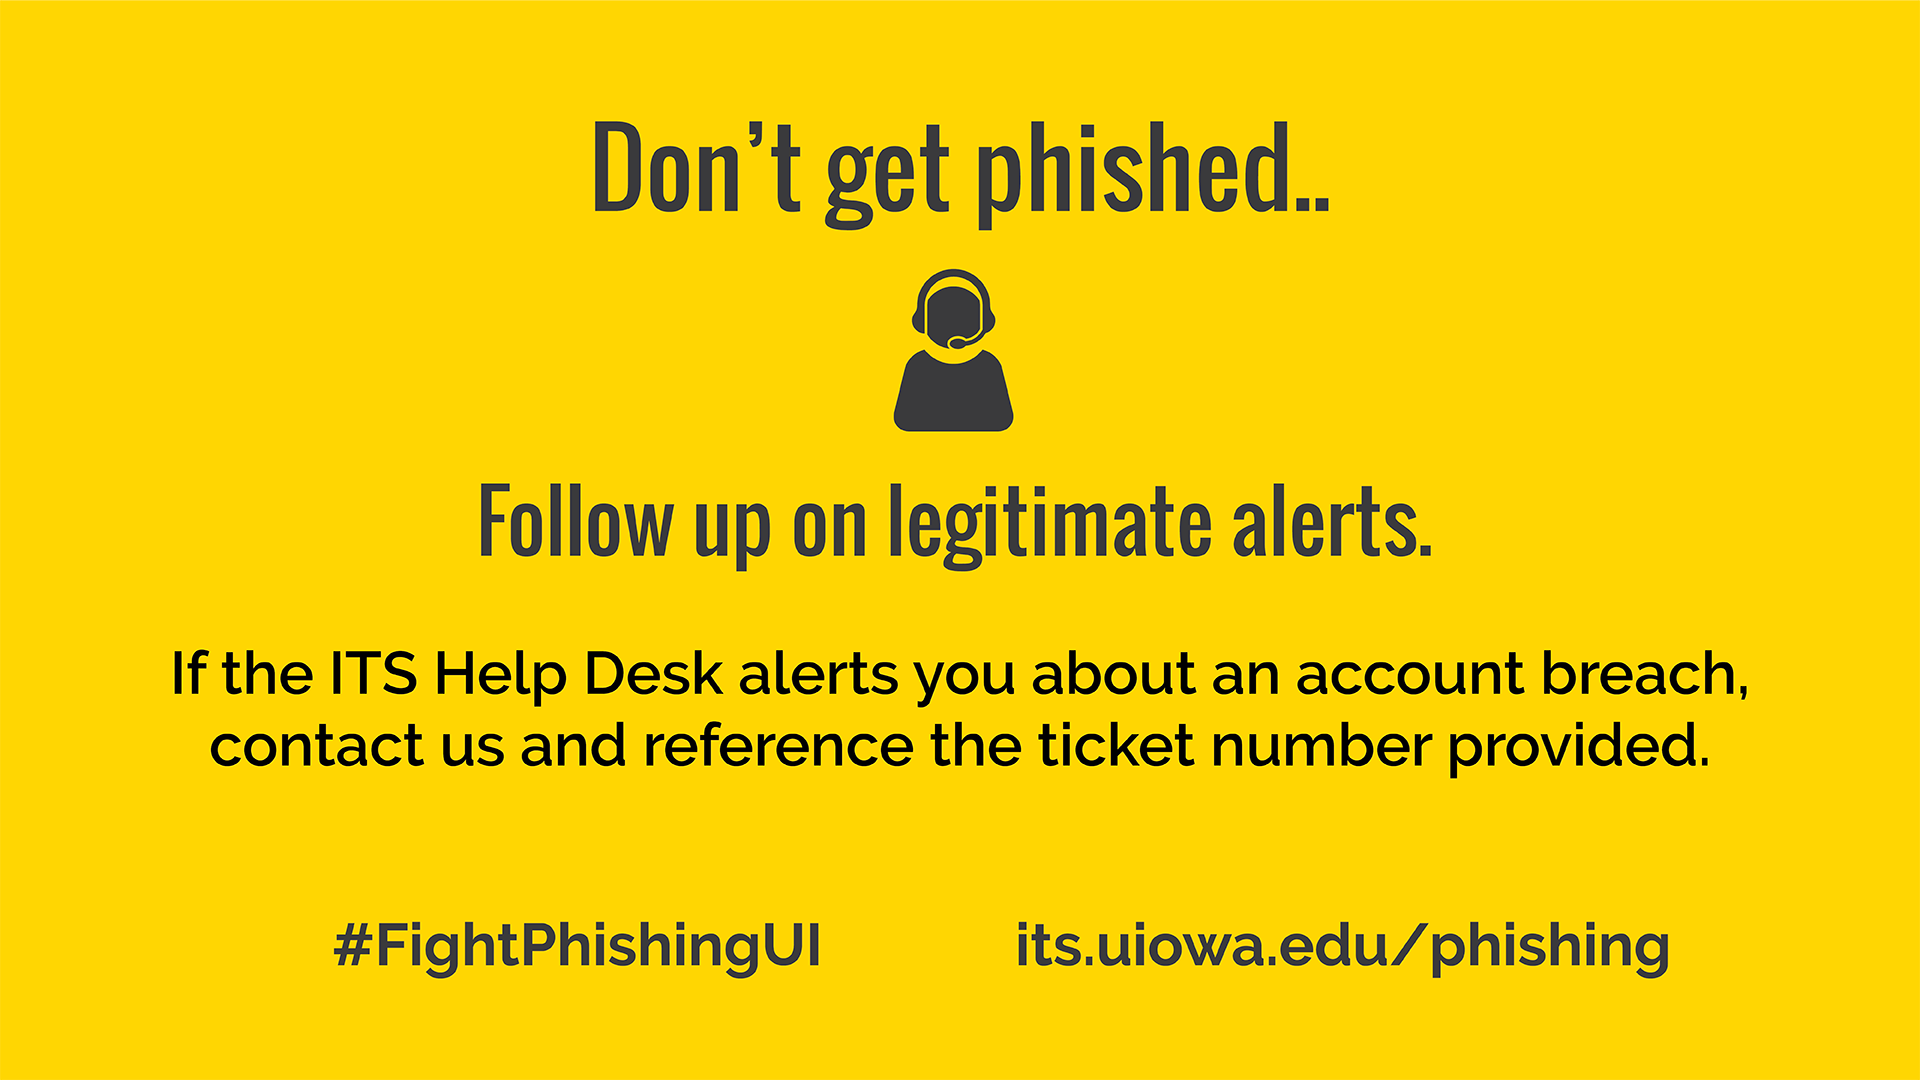 Don't get phished.. Follow up on legitimate alerts. If the ITS Help Desk alerts you about an account breach contact us and reference the ticket number provided. #FightPhishingUI its.uiowa.edu/phishing